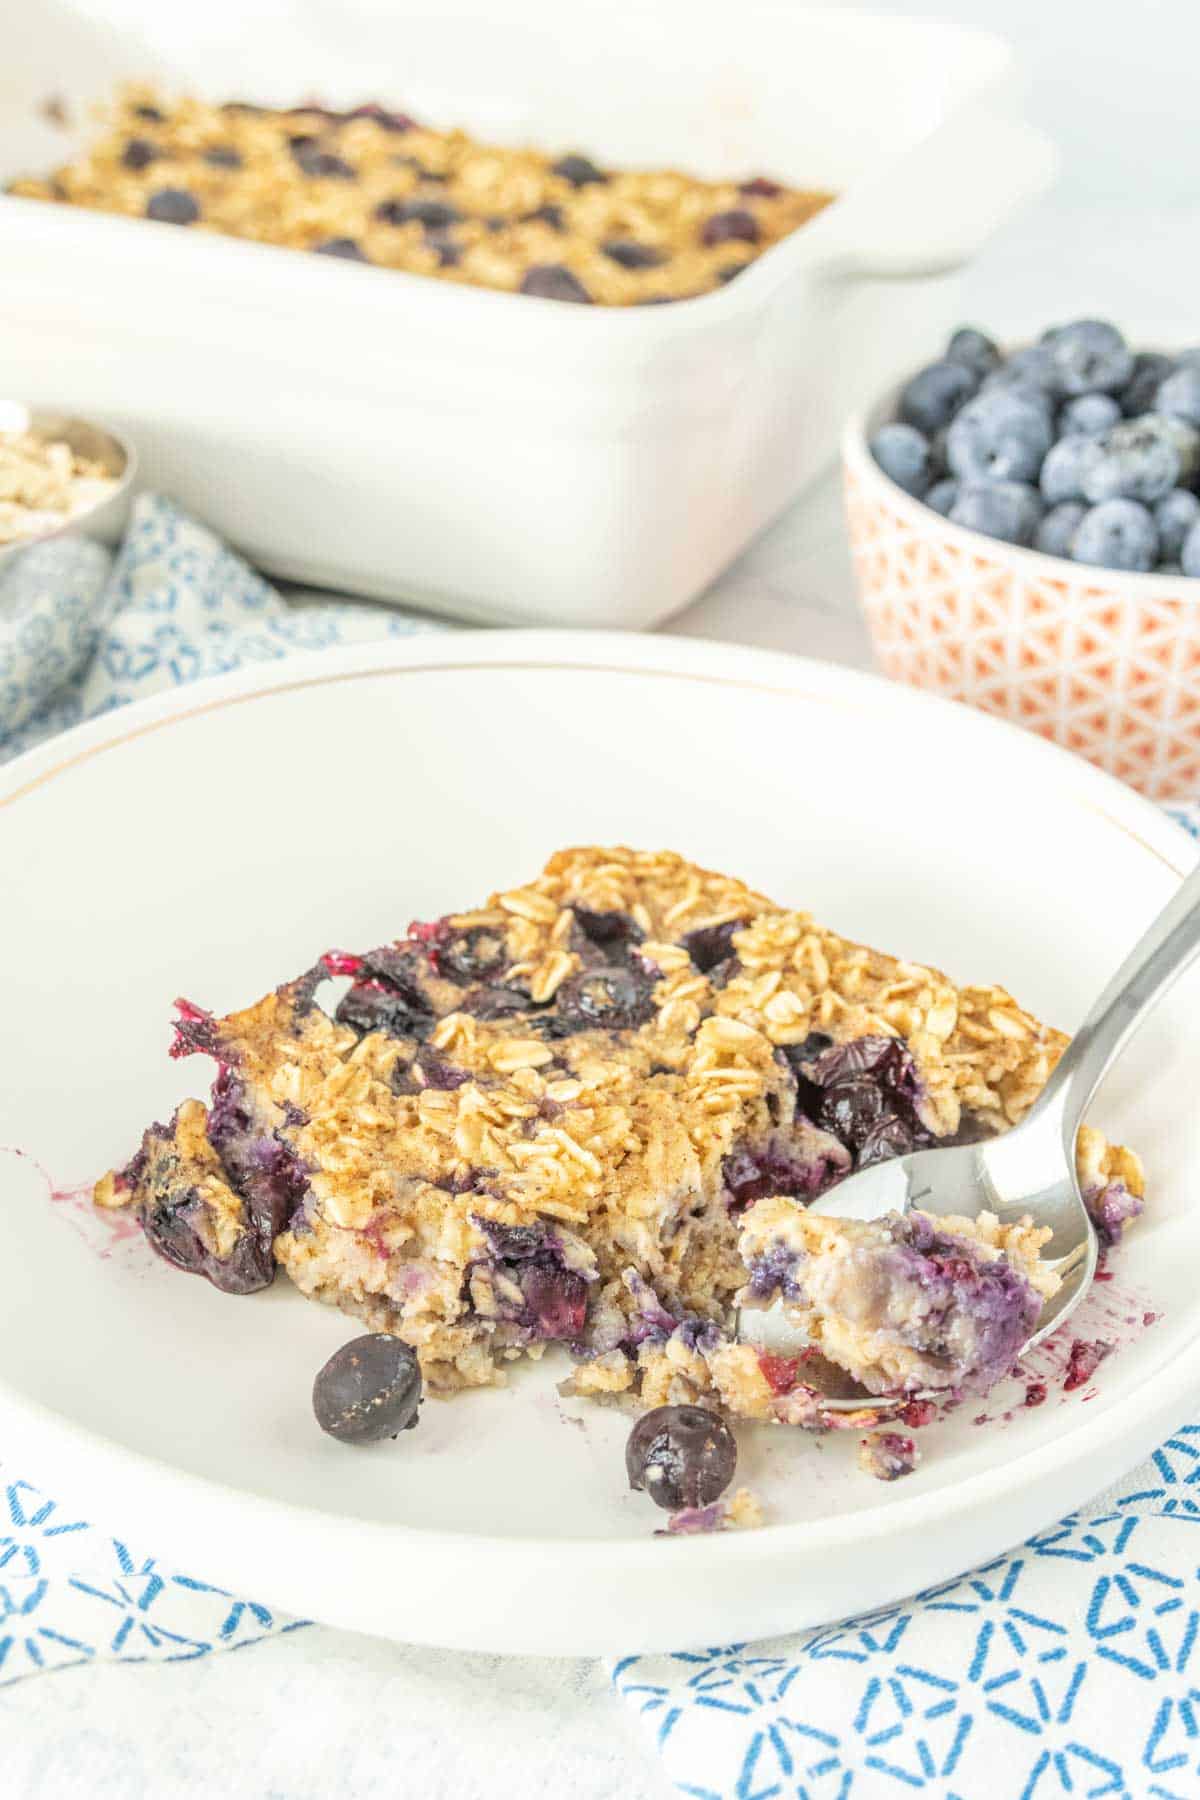 Baked oatmeal with blueberries on a plate with a spoon.